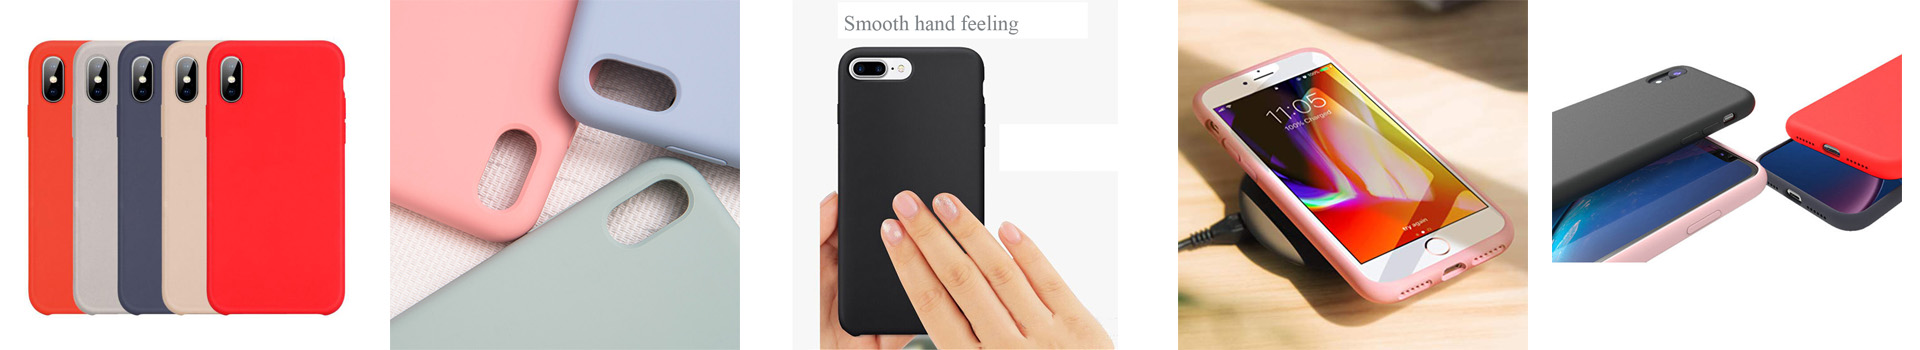 2019 Hot Seller Soft Case Silicone Manufacturer Wireless Earphone Carrying Case For Airpods